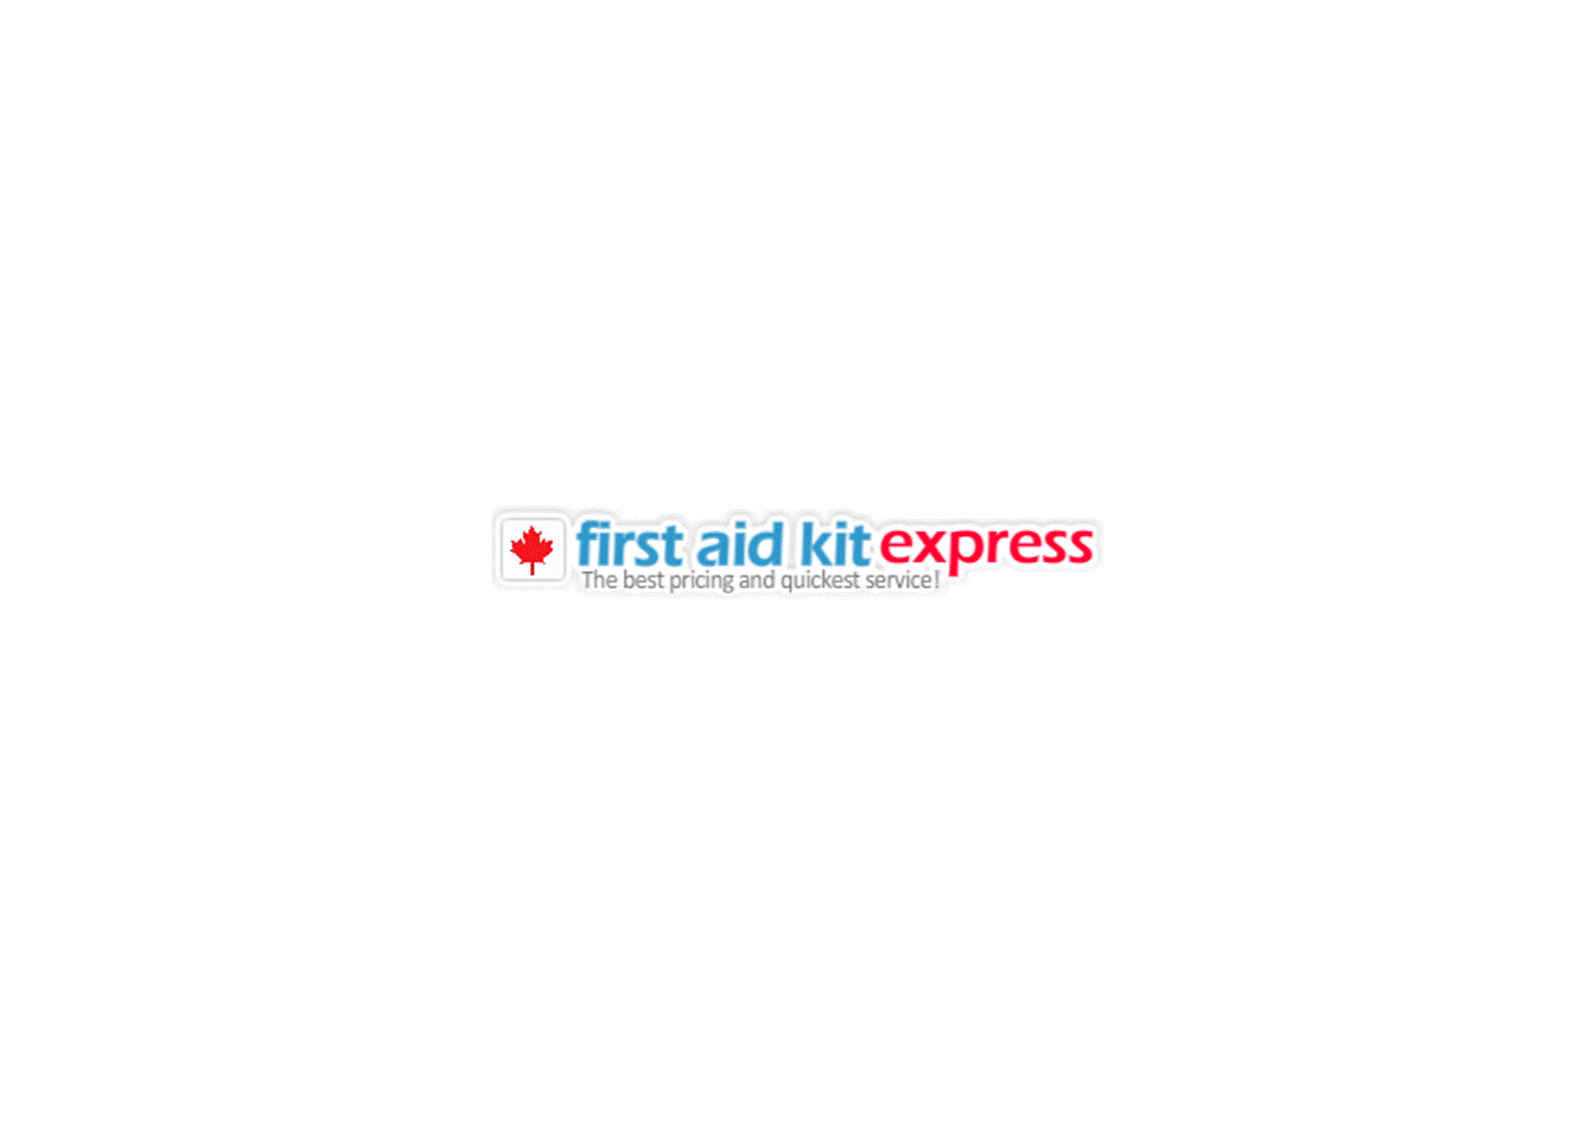 First Aid Kit Express